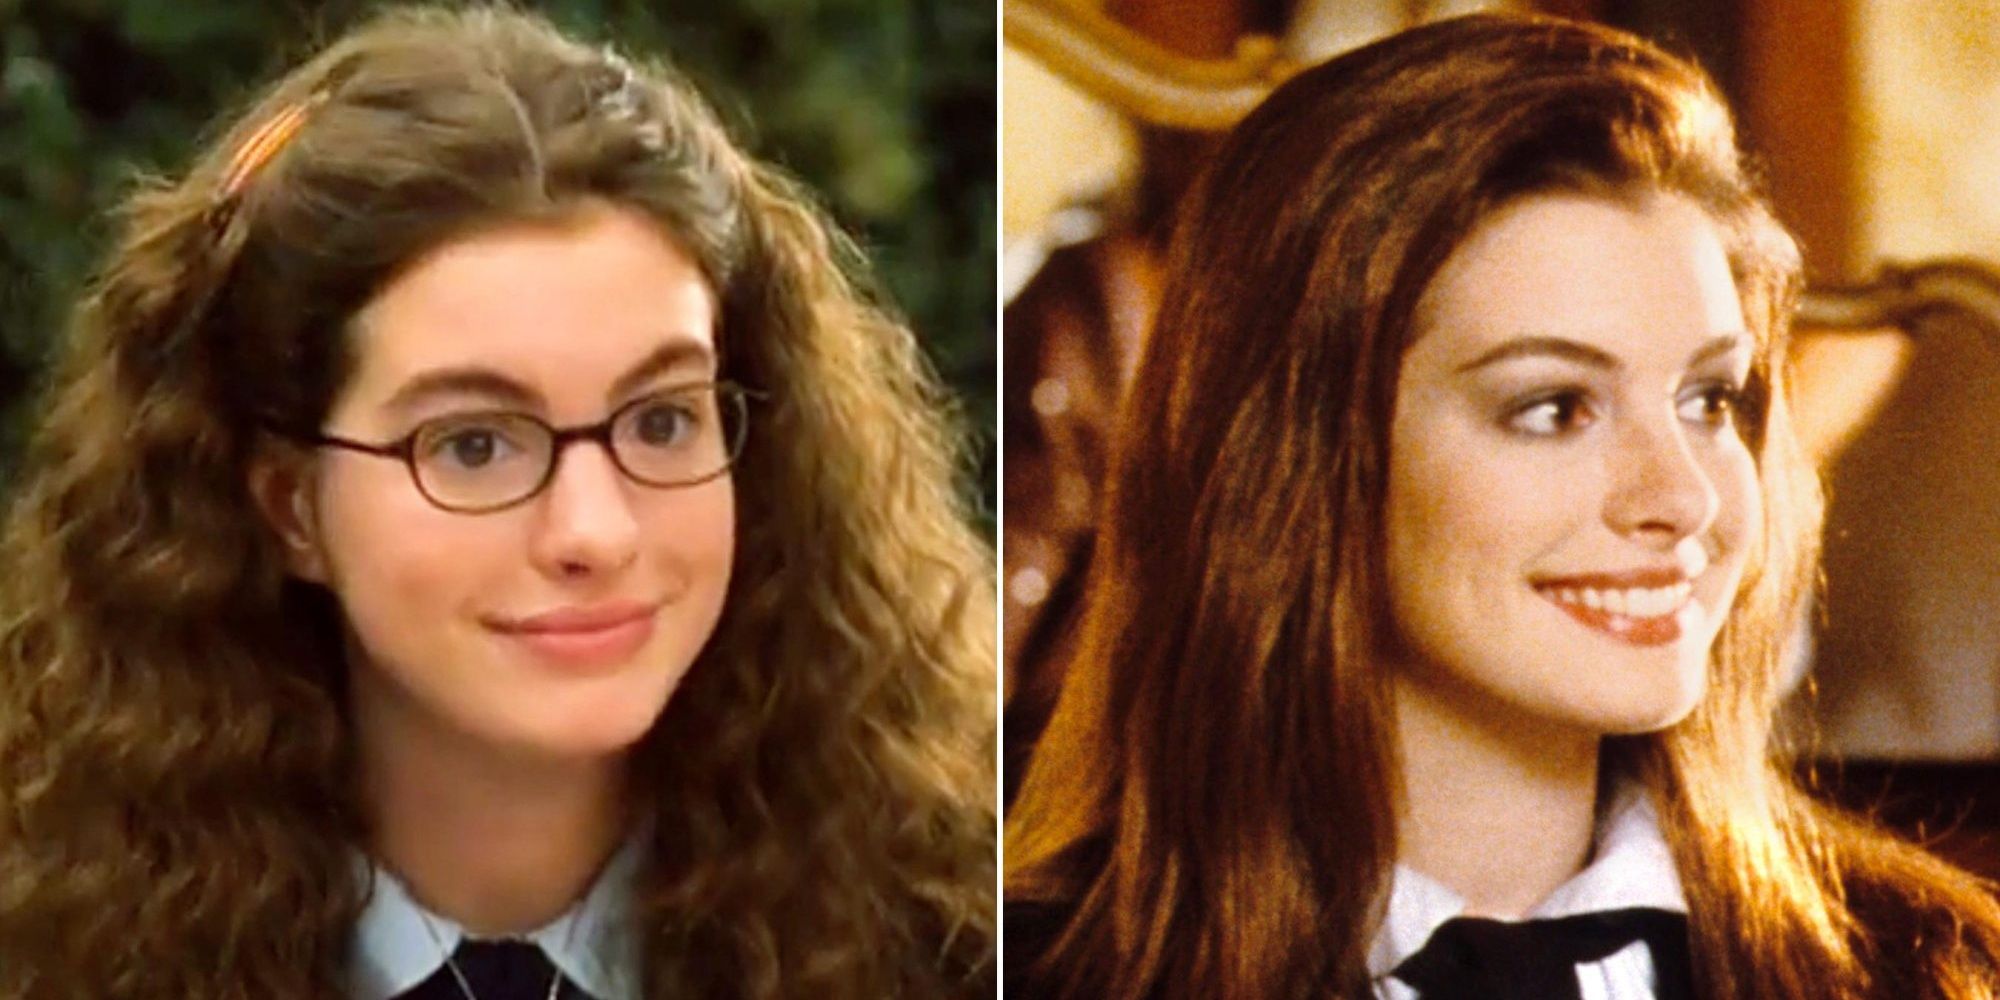 Mia's Makeover Before and After From The Princess Diaries